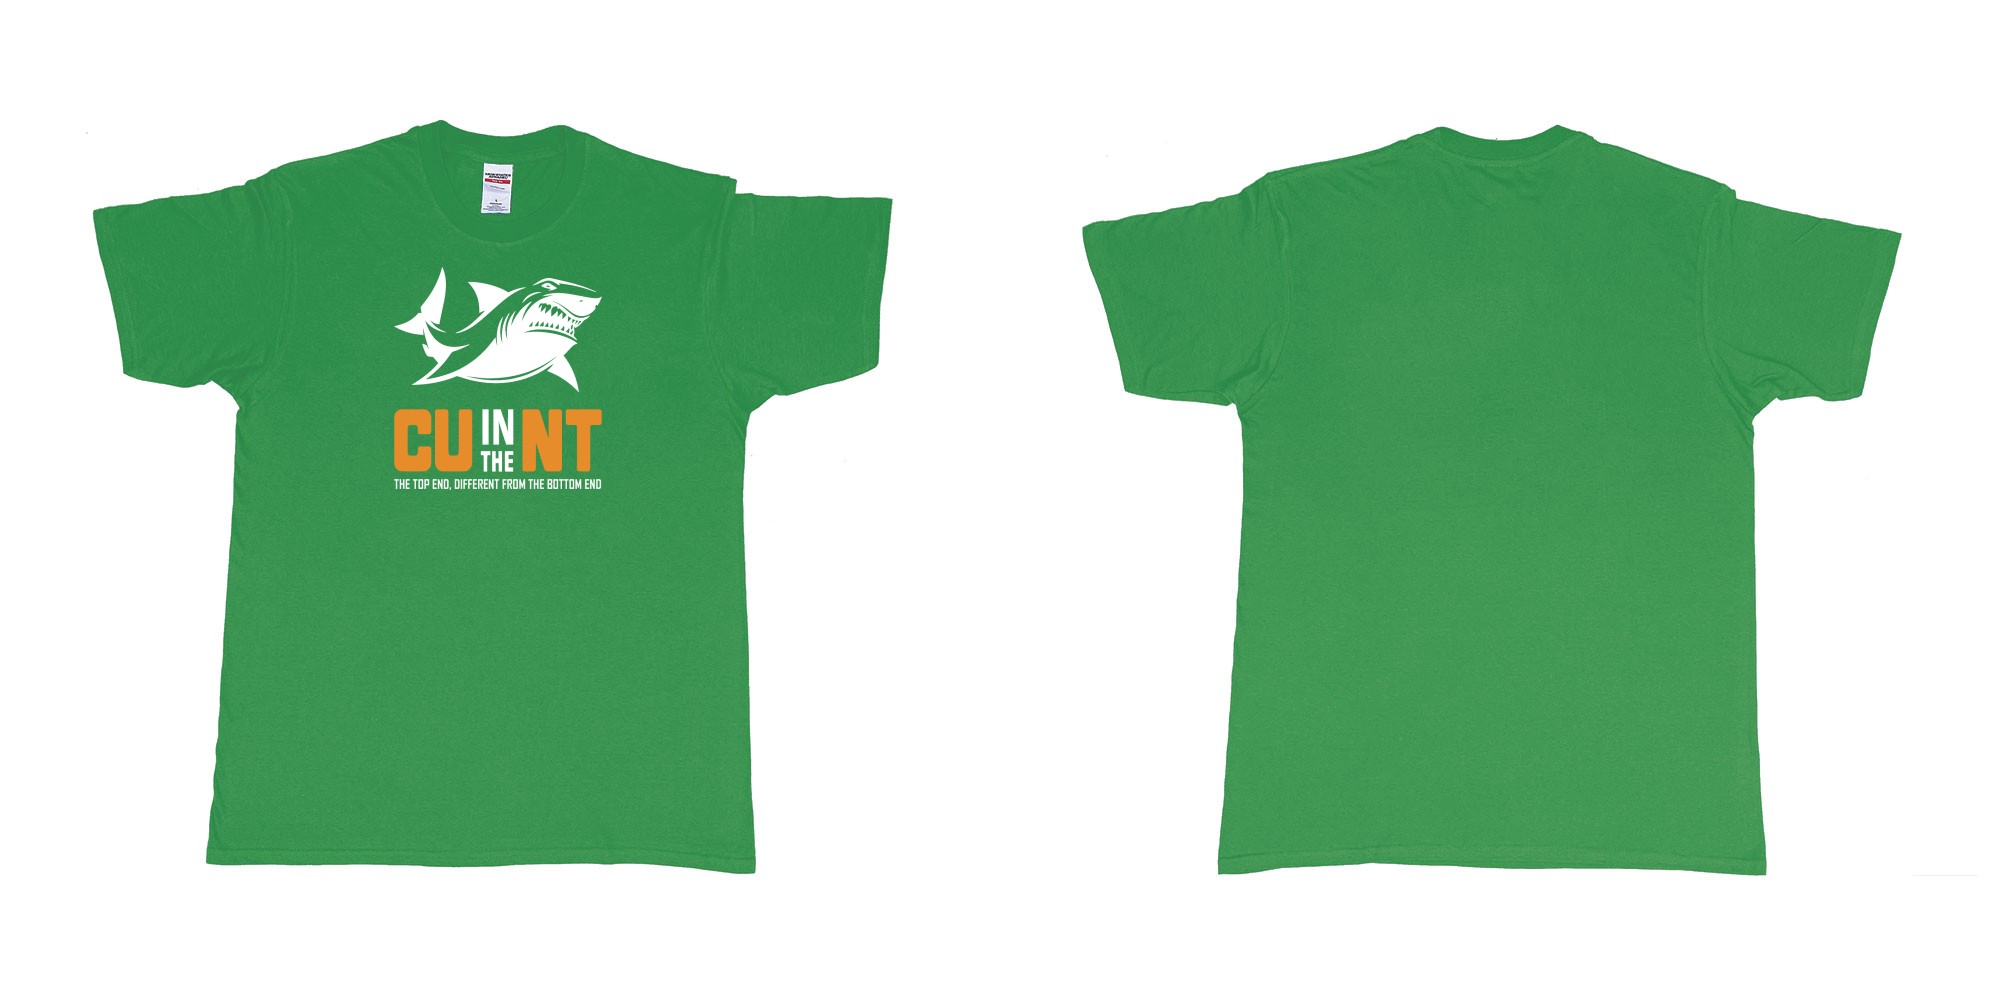 Custom tshirt design cu in the nt northern territory shark in fabric color irish-green choice your own text made in Bali by The Pirate Way